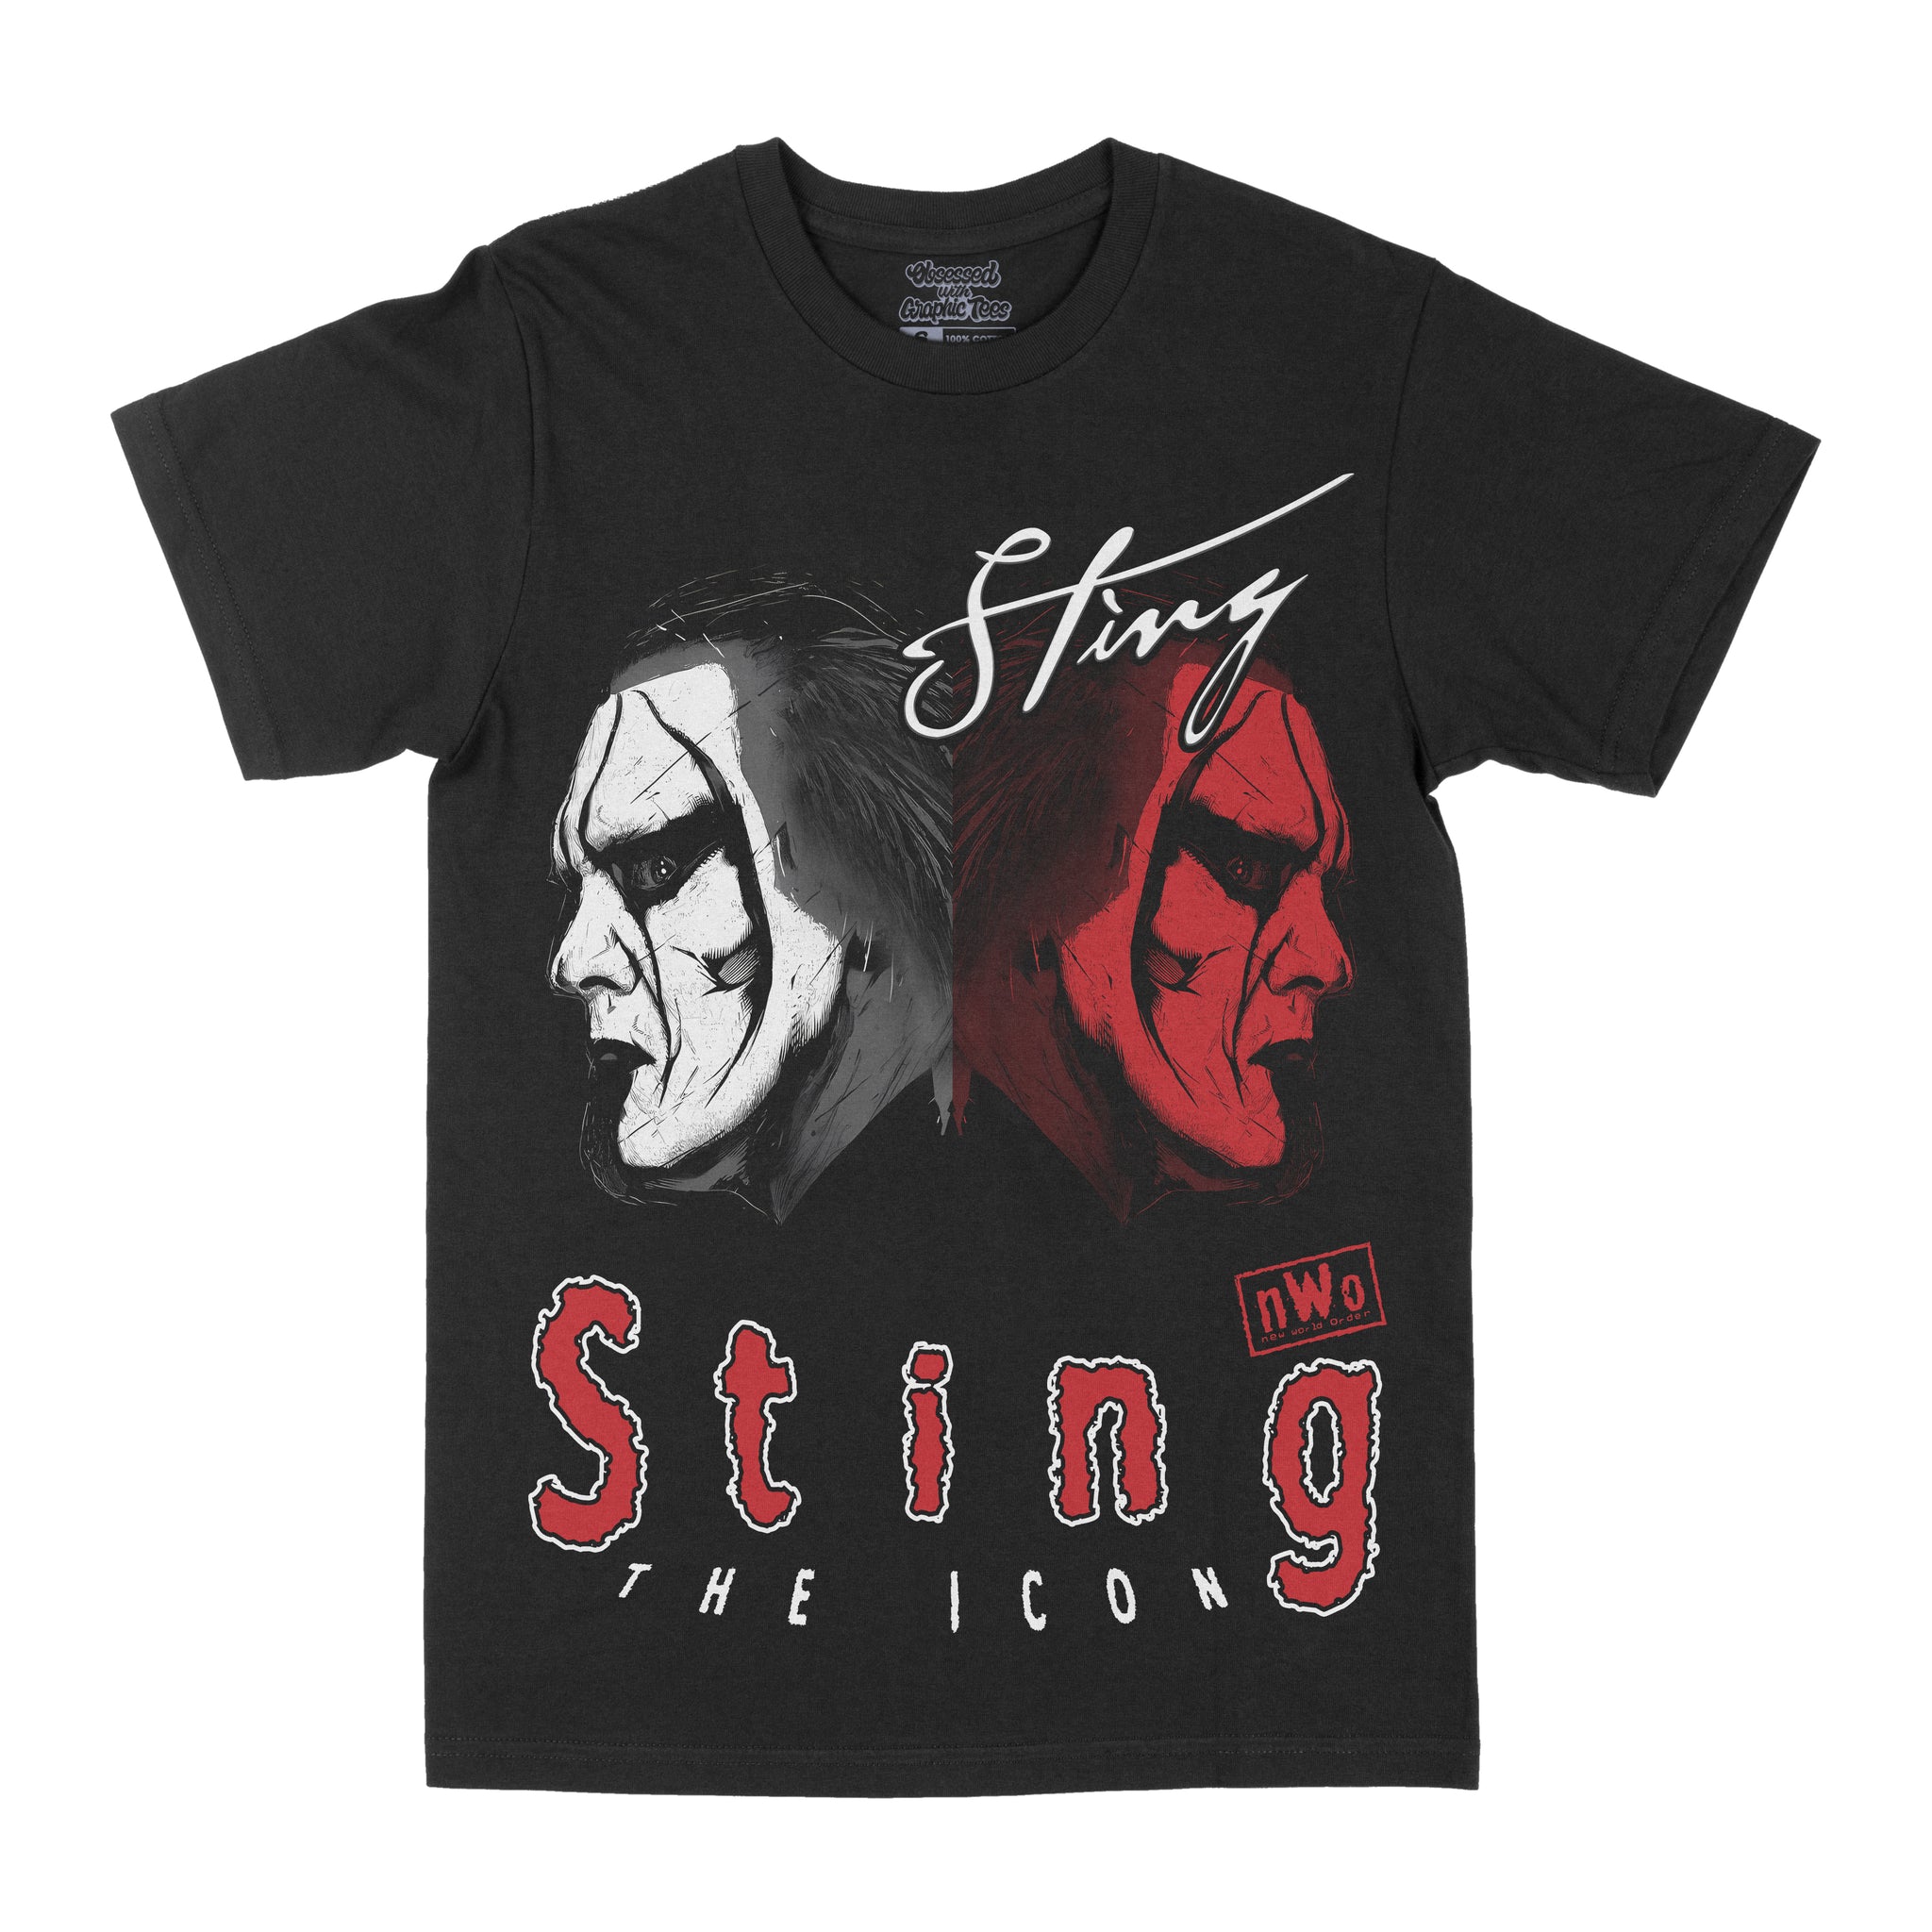 Sting "The Icon" Graphic Tee